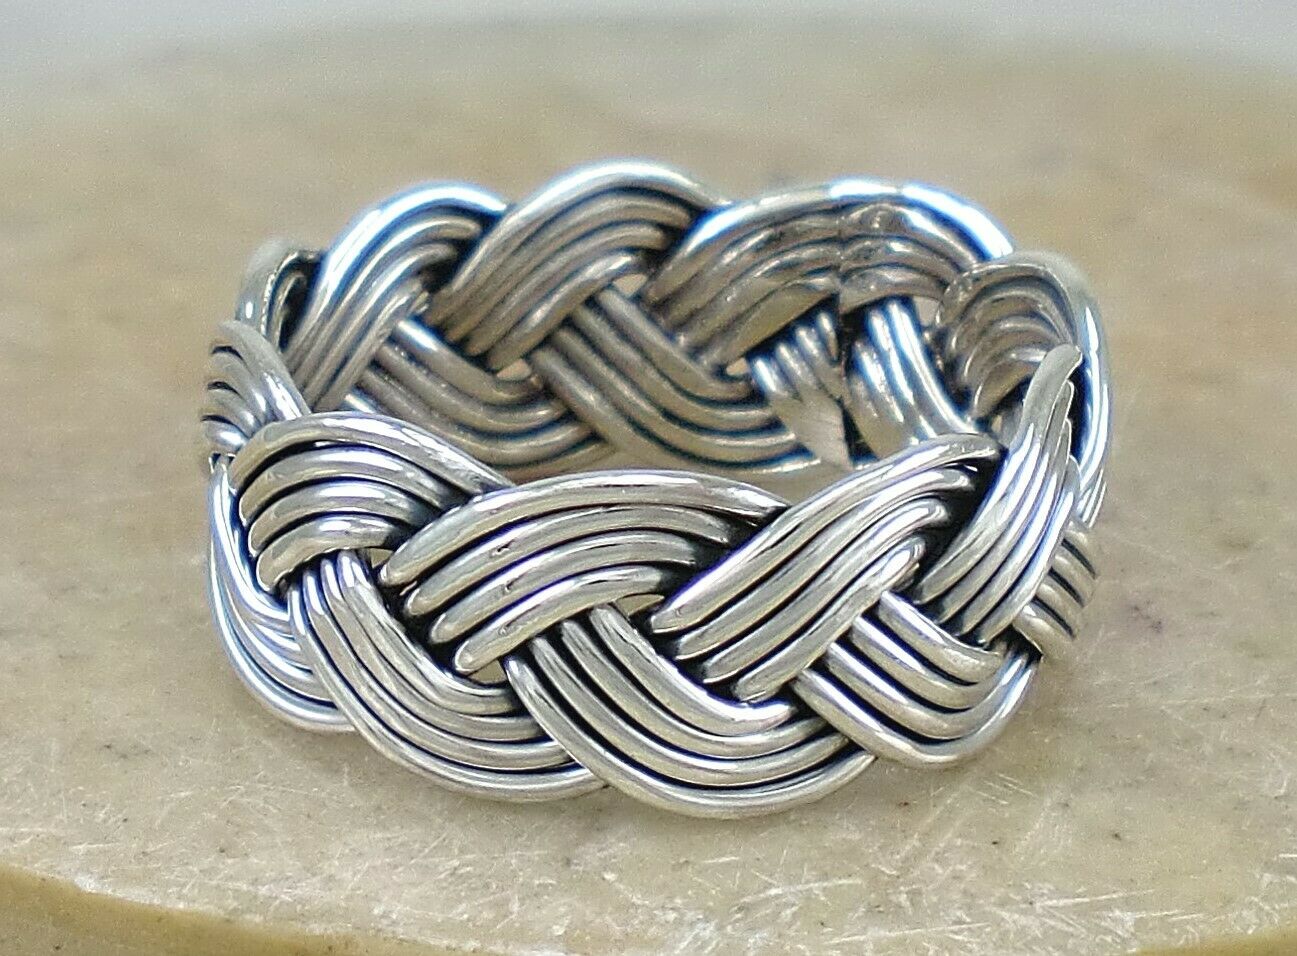 WIDE .925 STERLING SILVER WOVEN BRAIDED BAND RING size 9 style# r2757